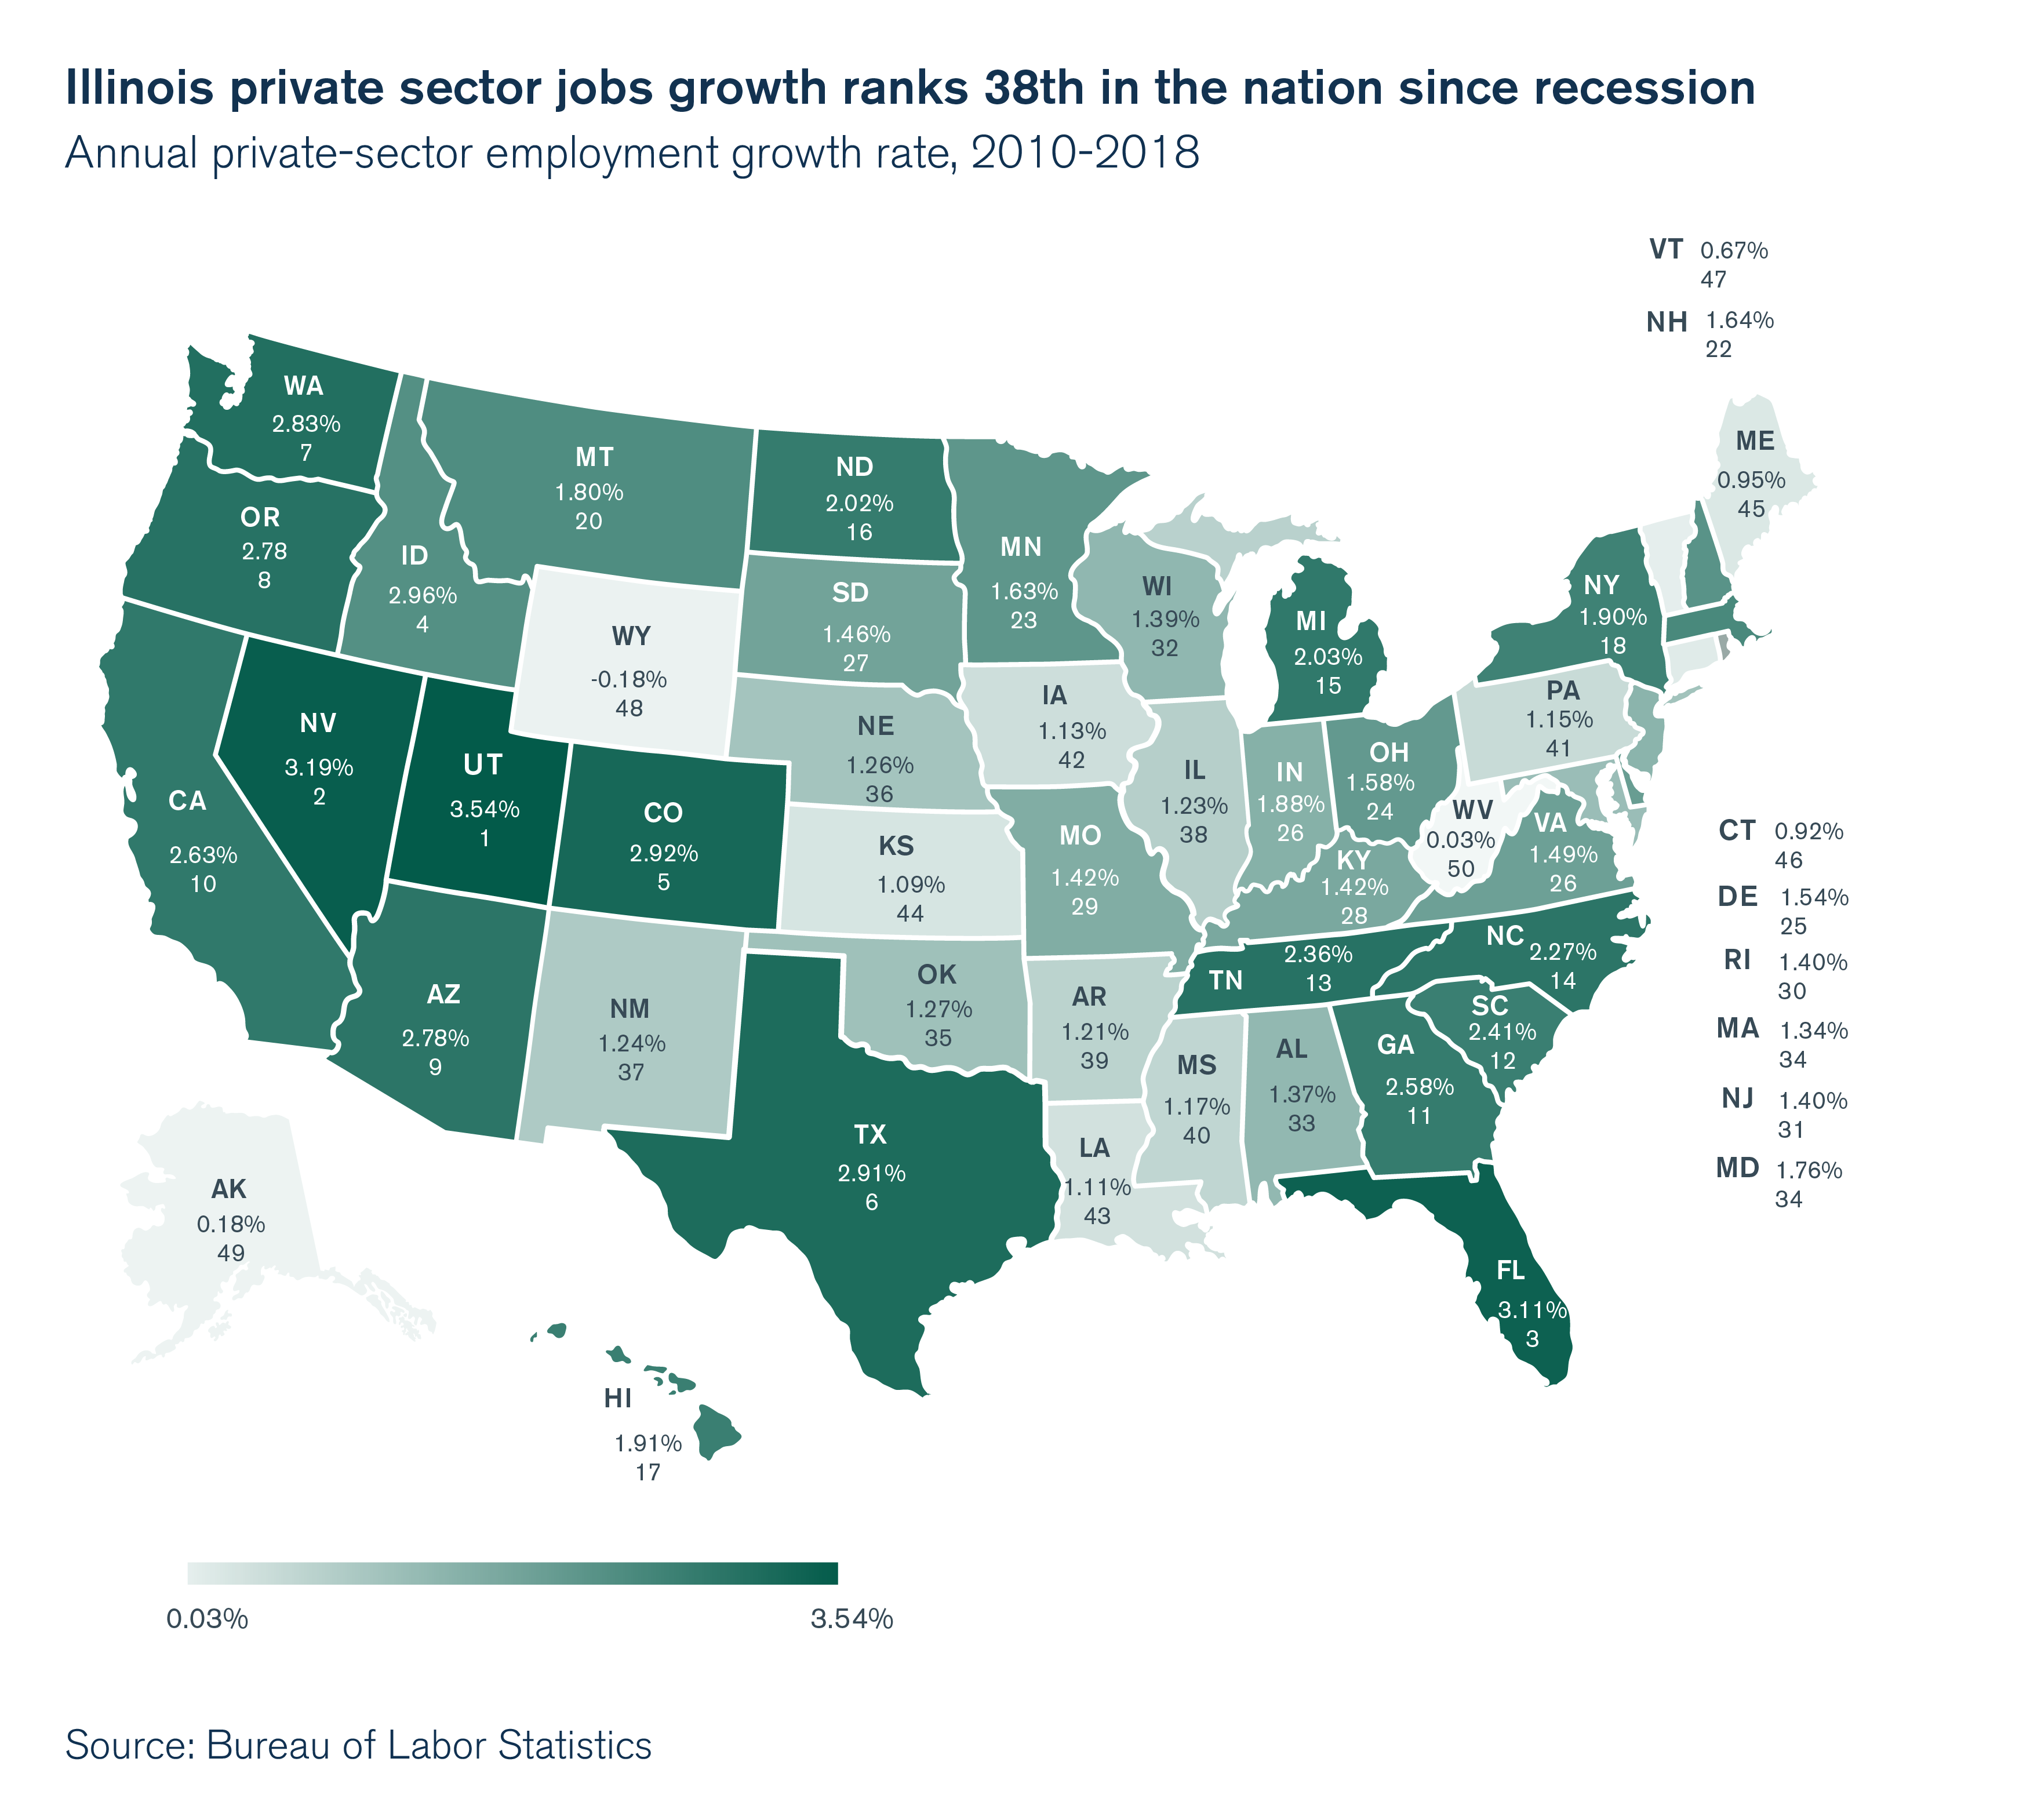 Illinois private sector jobs growth ranks 38th in the nation since recession